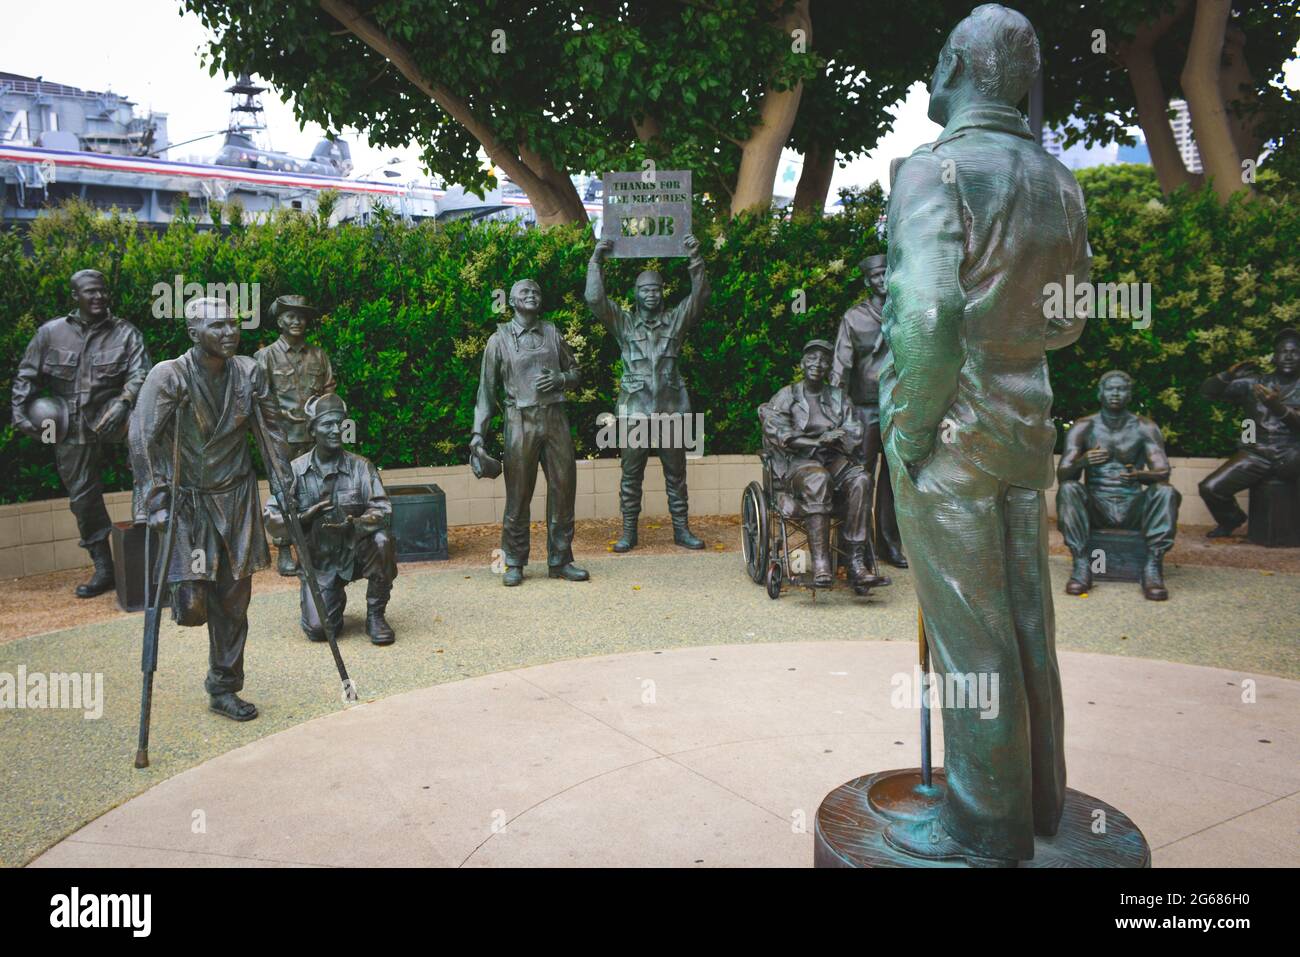 Bronze statues of military troops enjoying entertainment by Bob Hope at the 'National Salute to Bob Hope and the Military' memorial, San Diego, CA Stock Photo